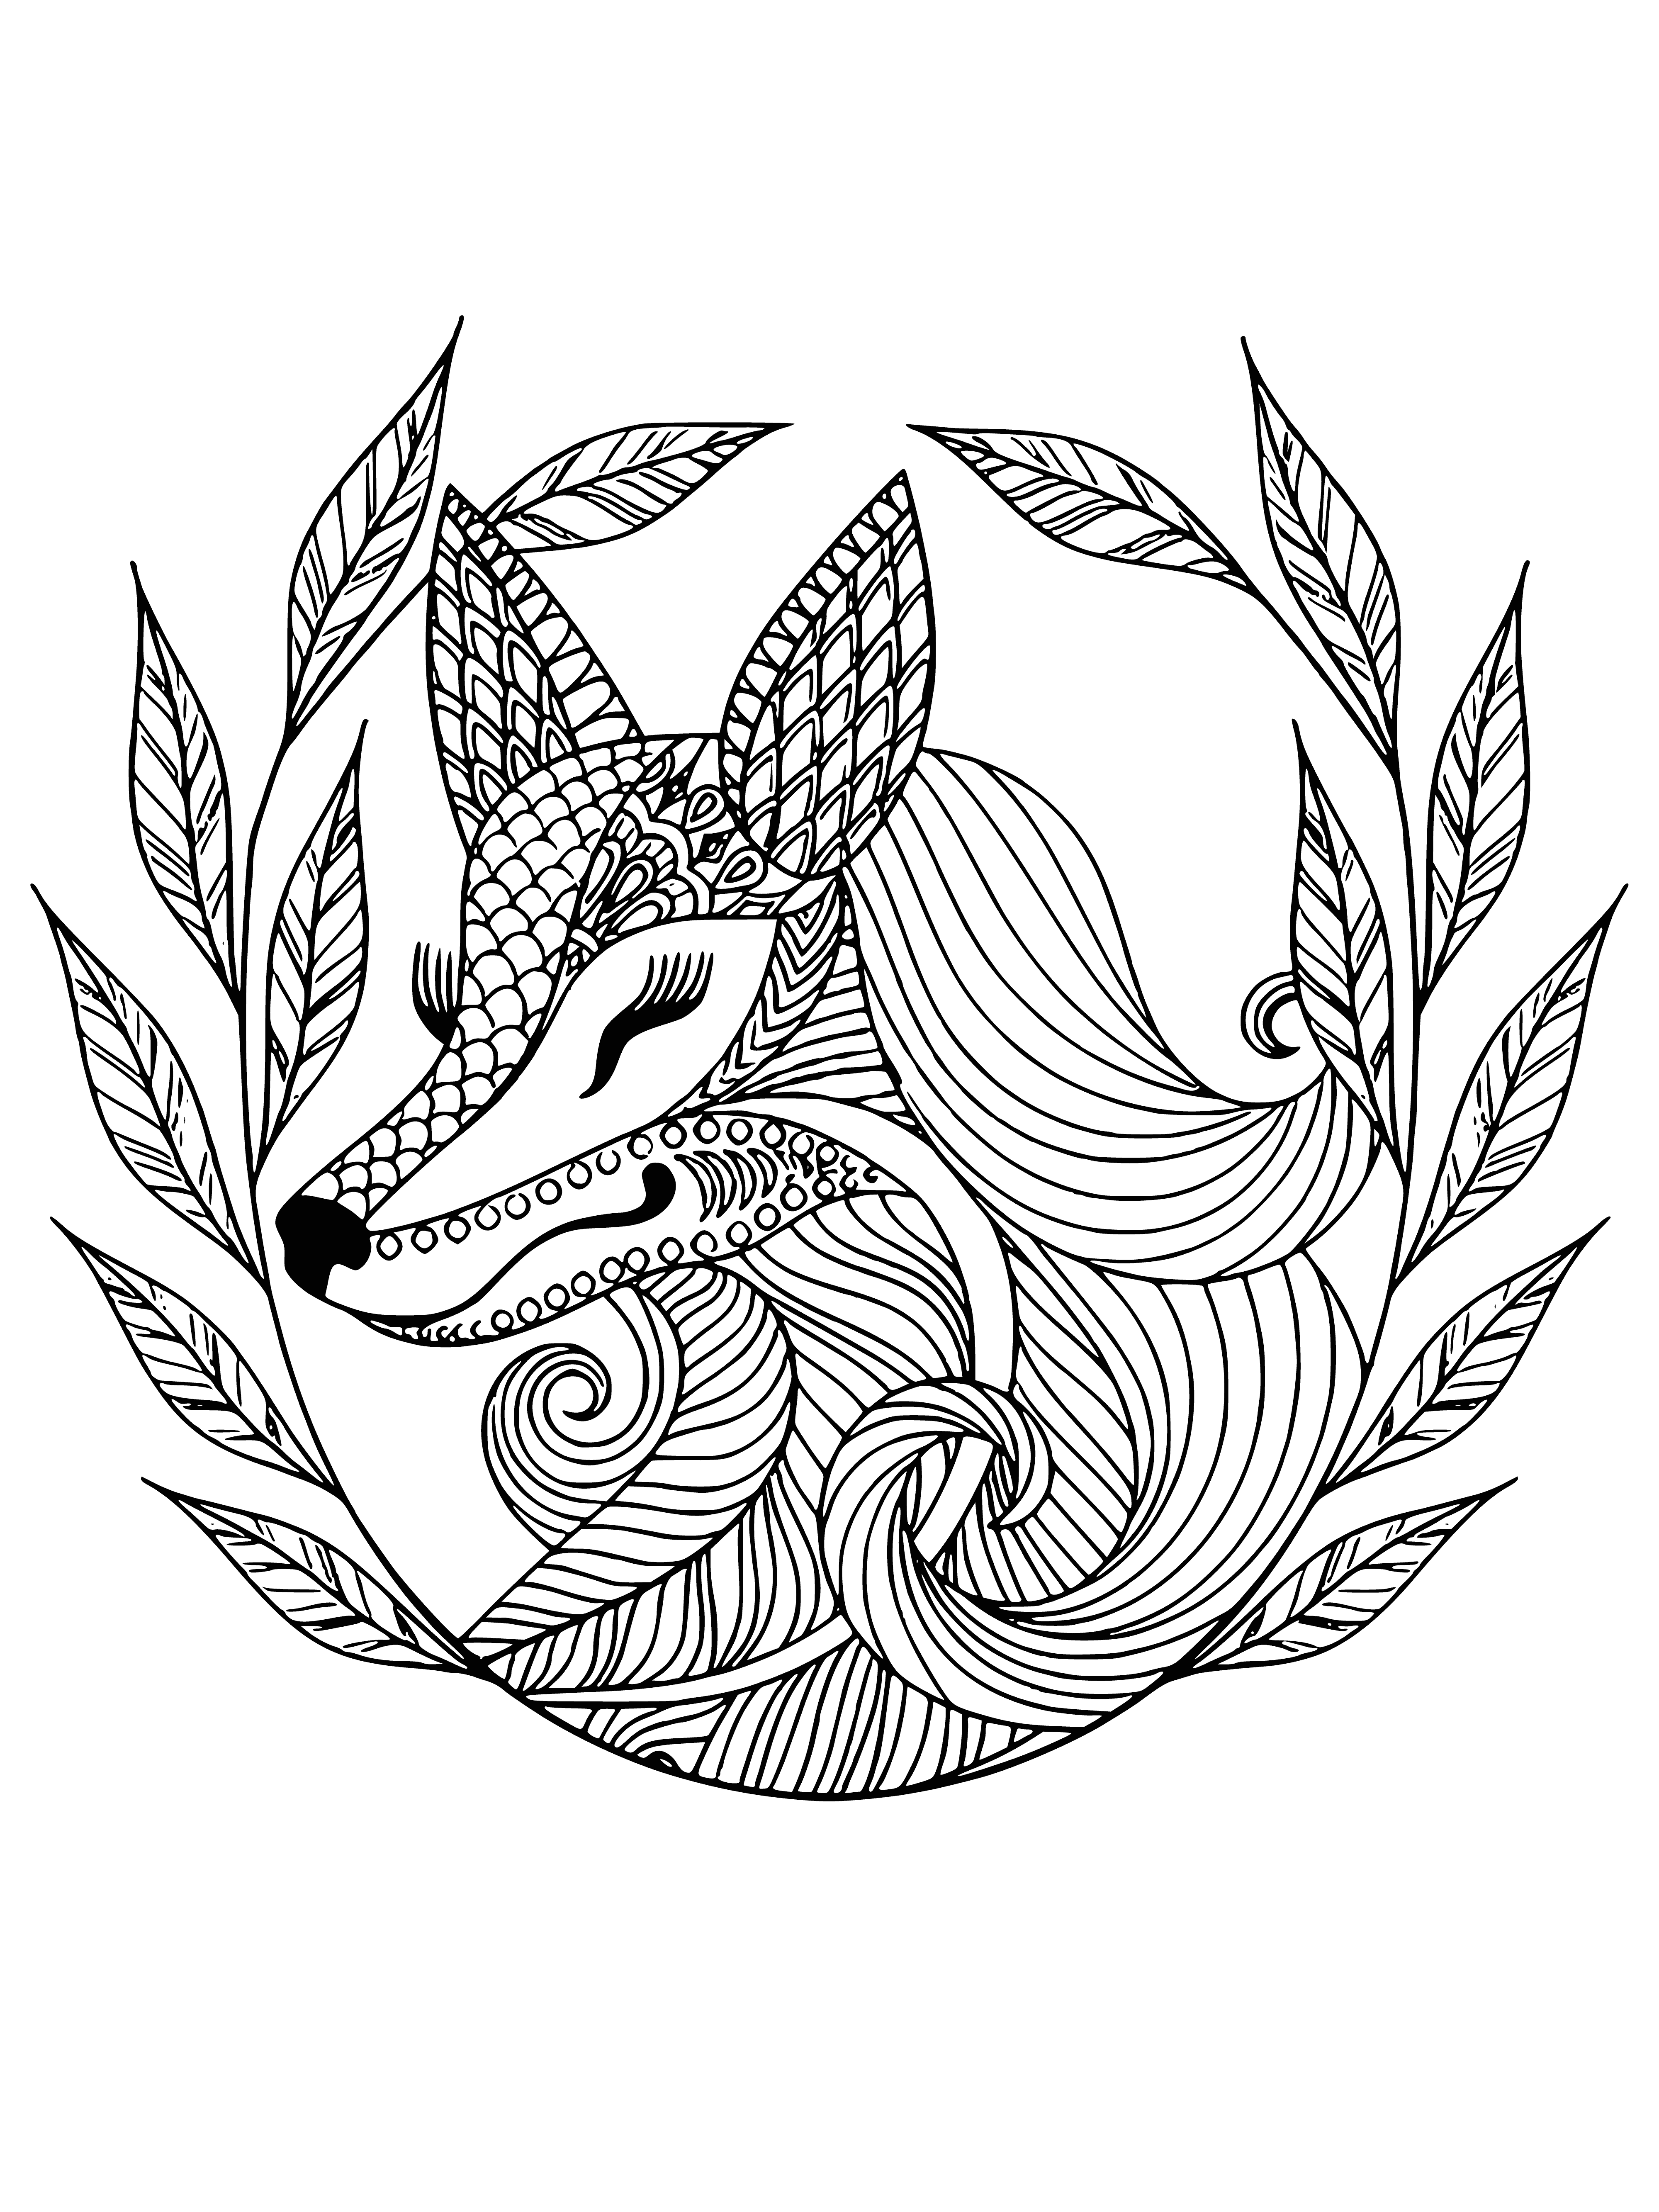 Fox-beauty coloring page